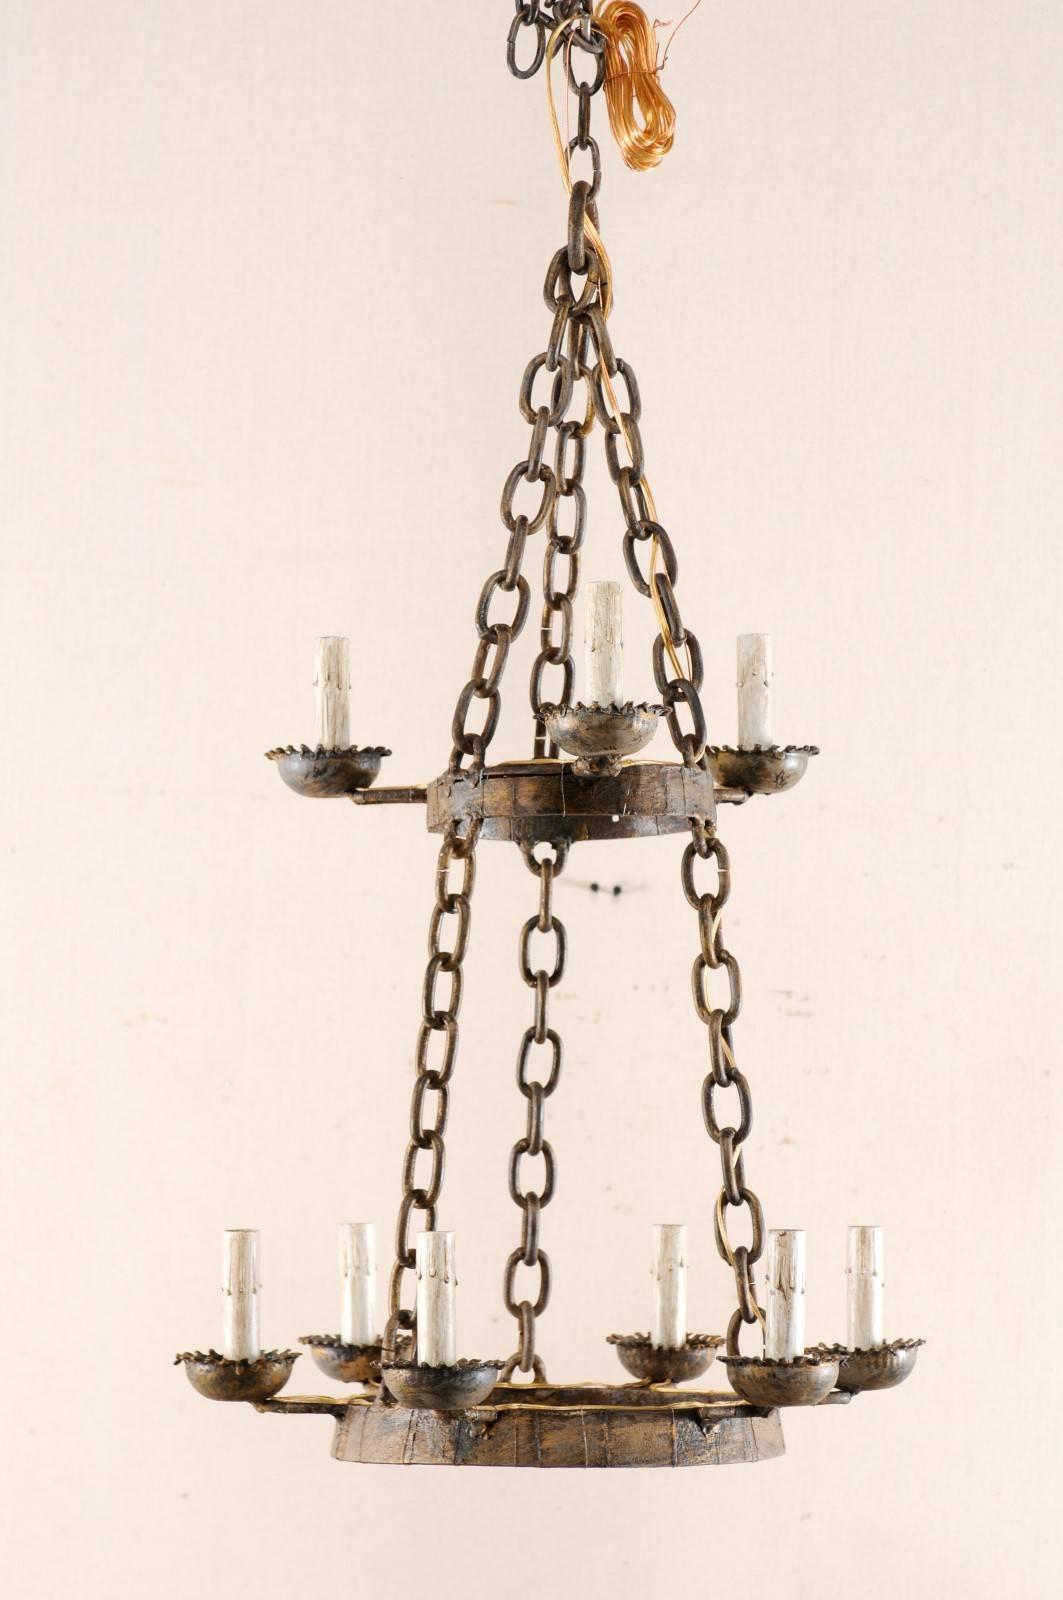 A vintage French nine-light iron chandelier with two-tiered rings. This French two-tiered iron chandelier from the mid-20th century features a lower ring with six lights, and a smaller-sized upper ring consisting of three lights. Each arm projects